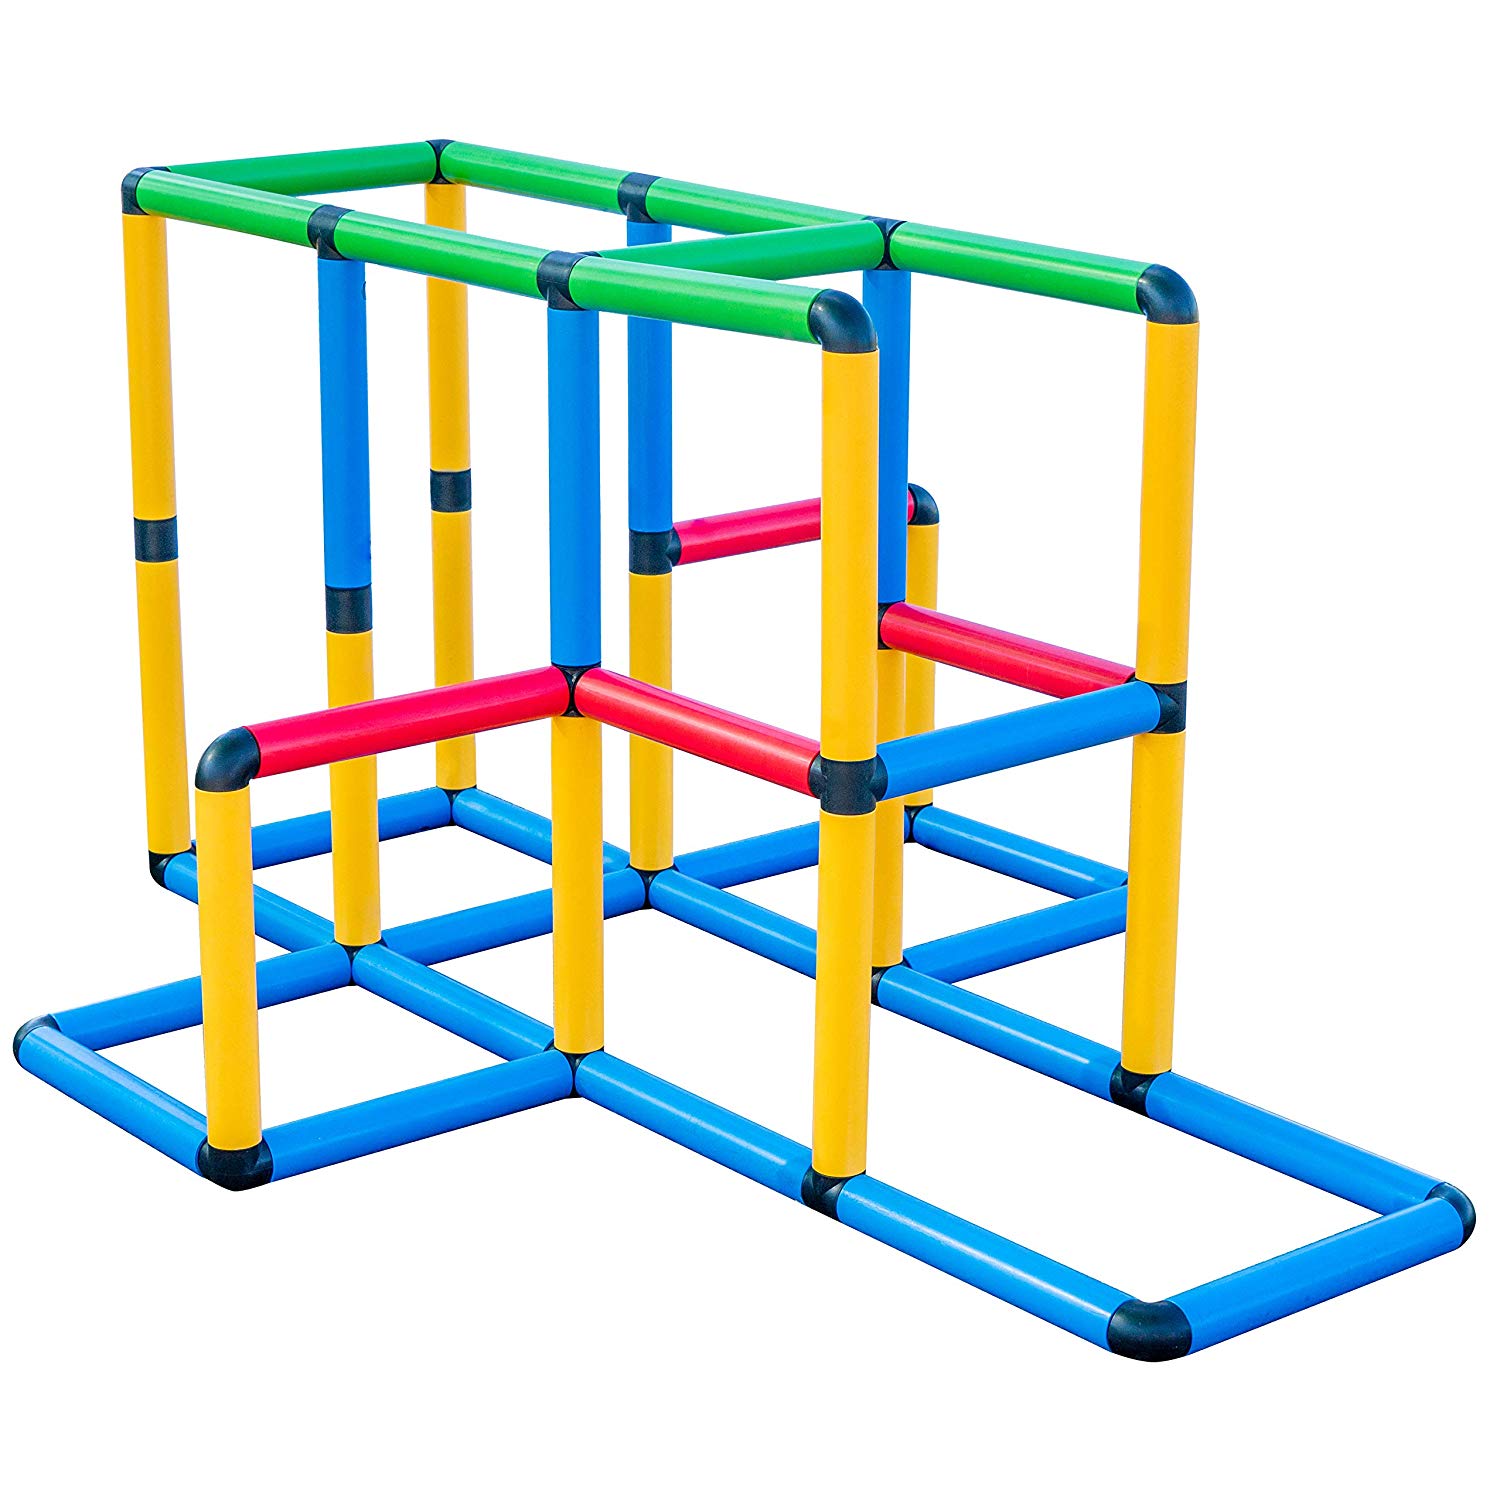 Giant Classic Tic Tac Toe Game ? Oversized Interlocking Colorful Eva Foam Squares with Jumbo x and O Pieces for Indoor and Outdoor Play by Hey! Play!